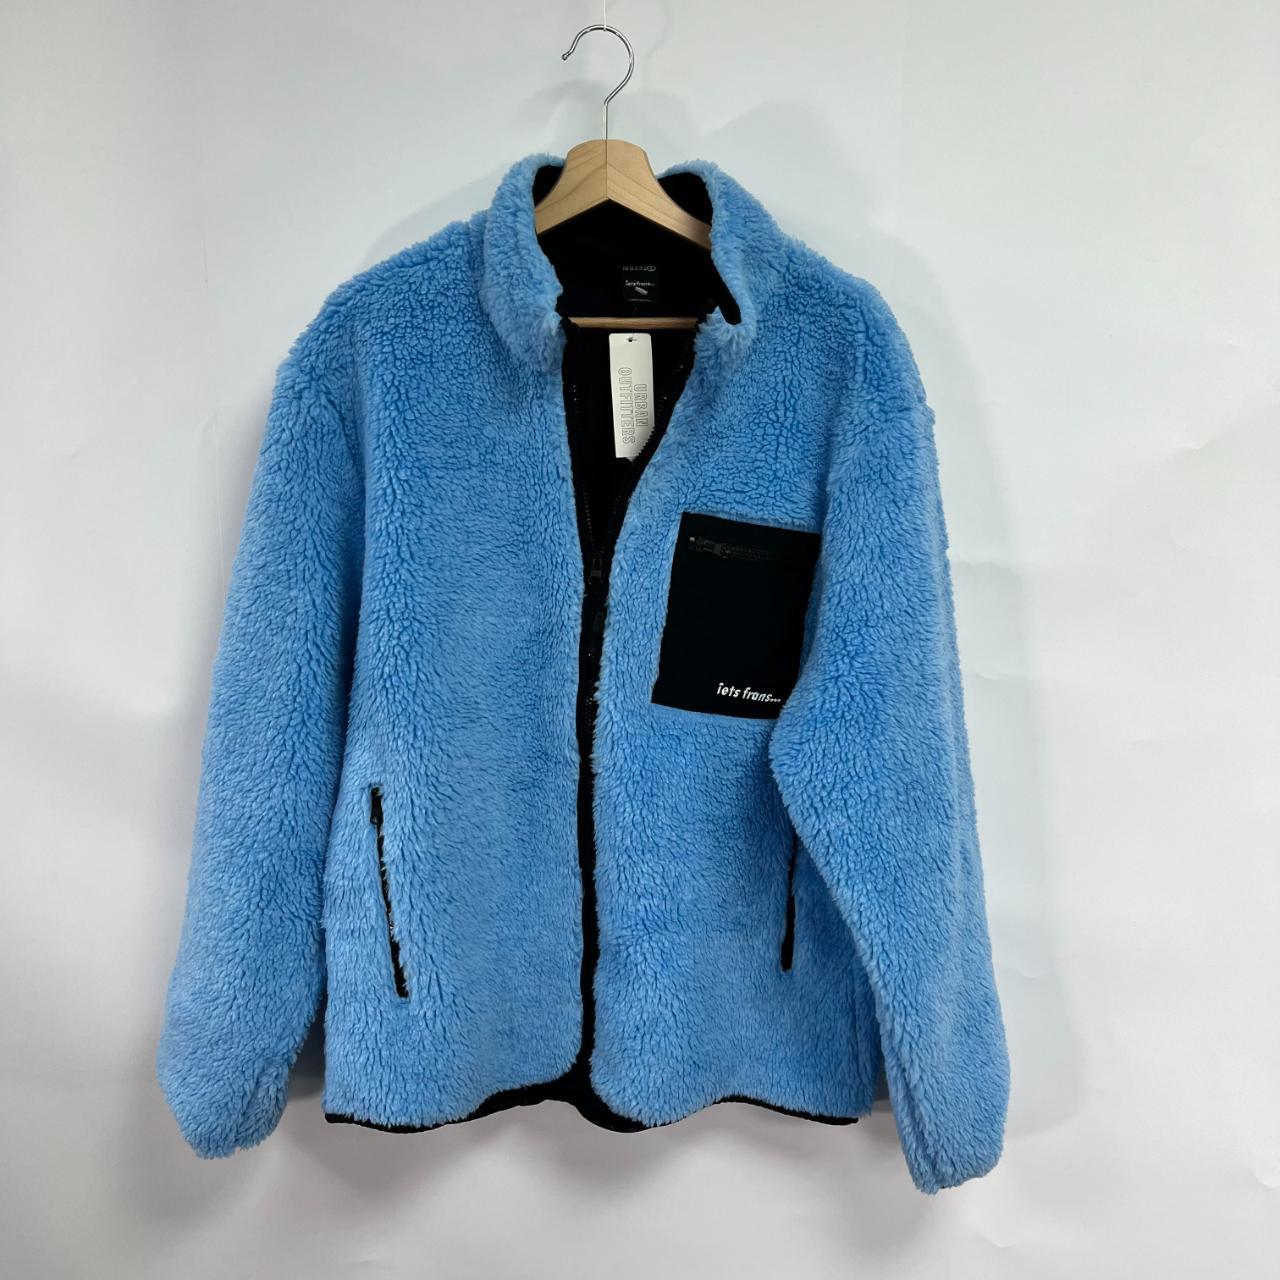 Urban Outfitters iets Frans Zip-Up Pocket Teddy... - Depop